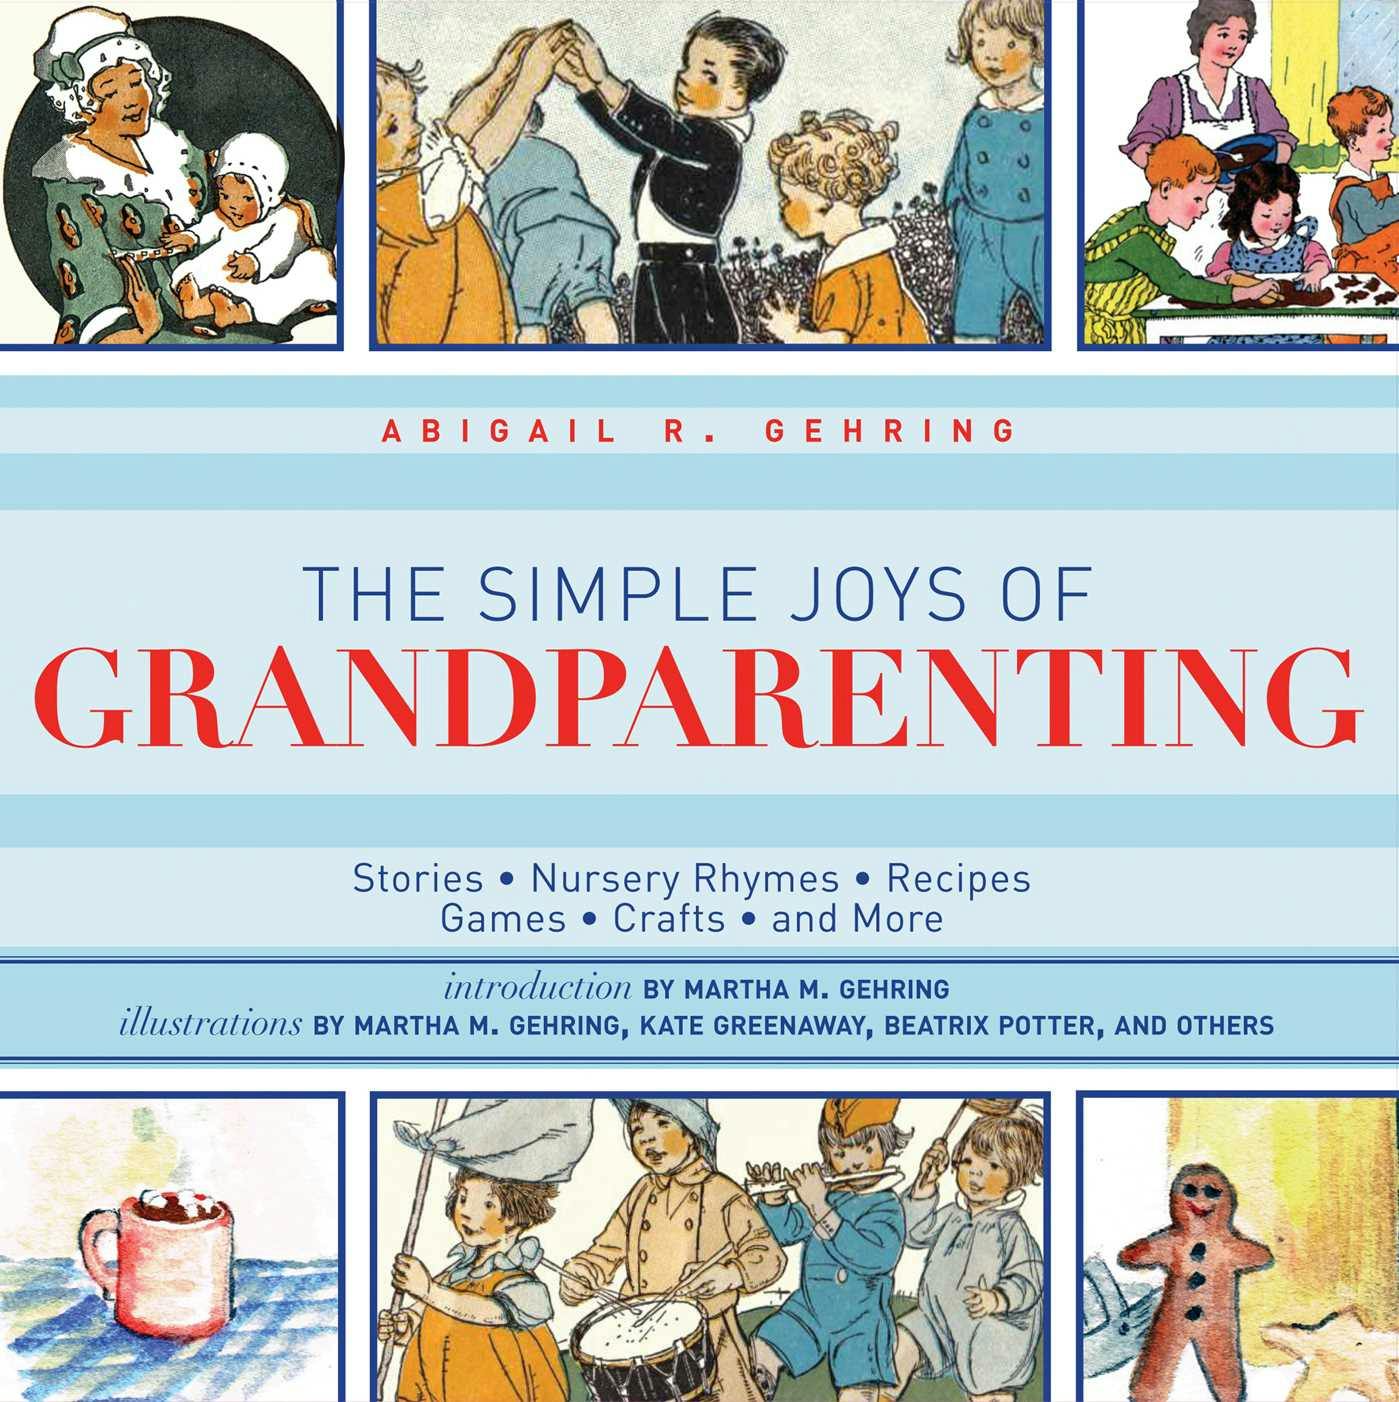 The Simple Joys of Grandparenting: Stories, Nursery Rhymes, Recipes, Games, Crafts, and More - Abigail Gehring